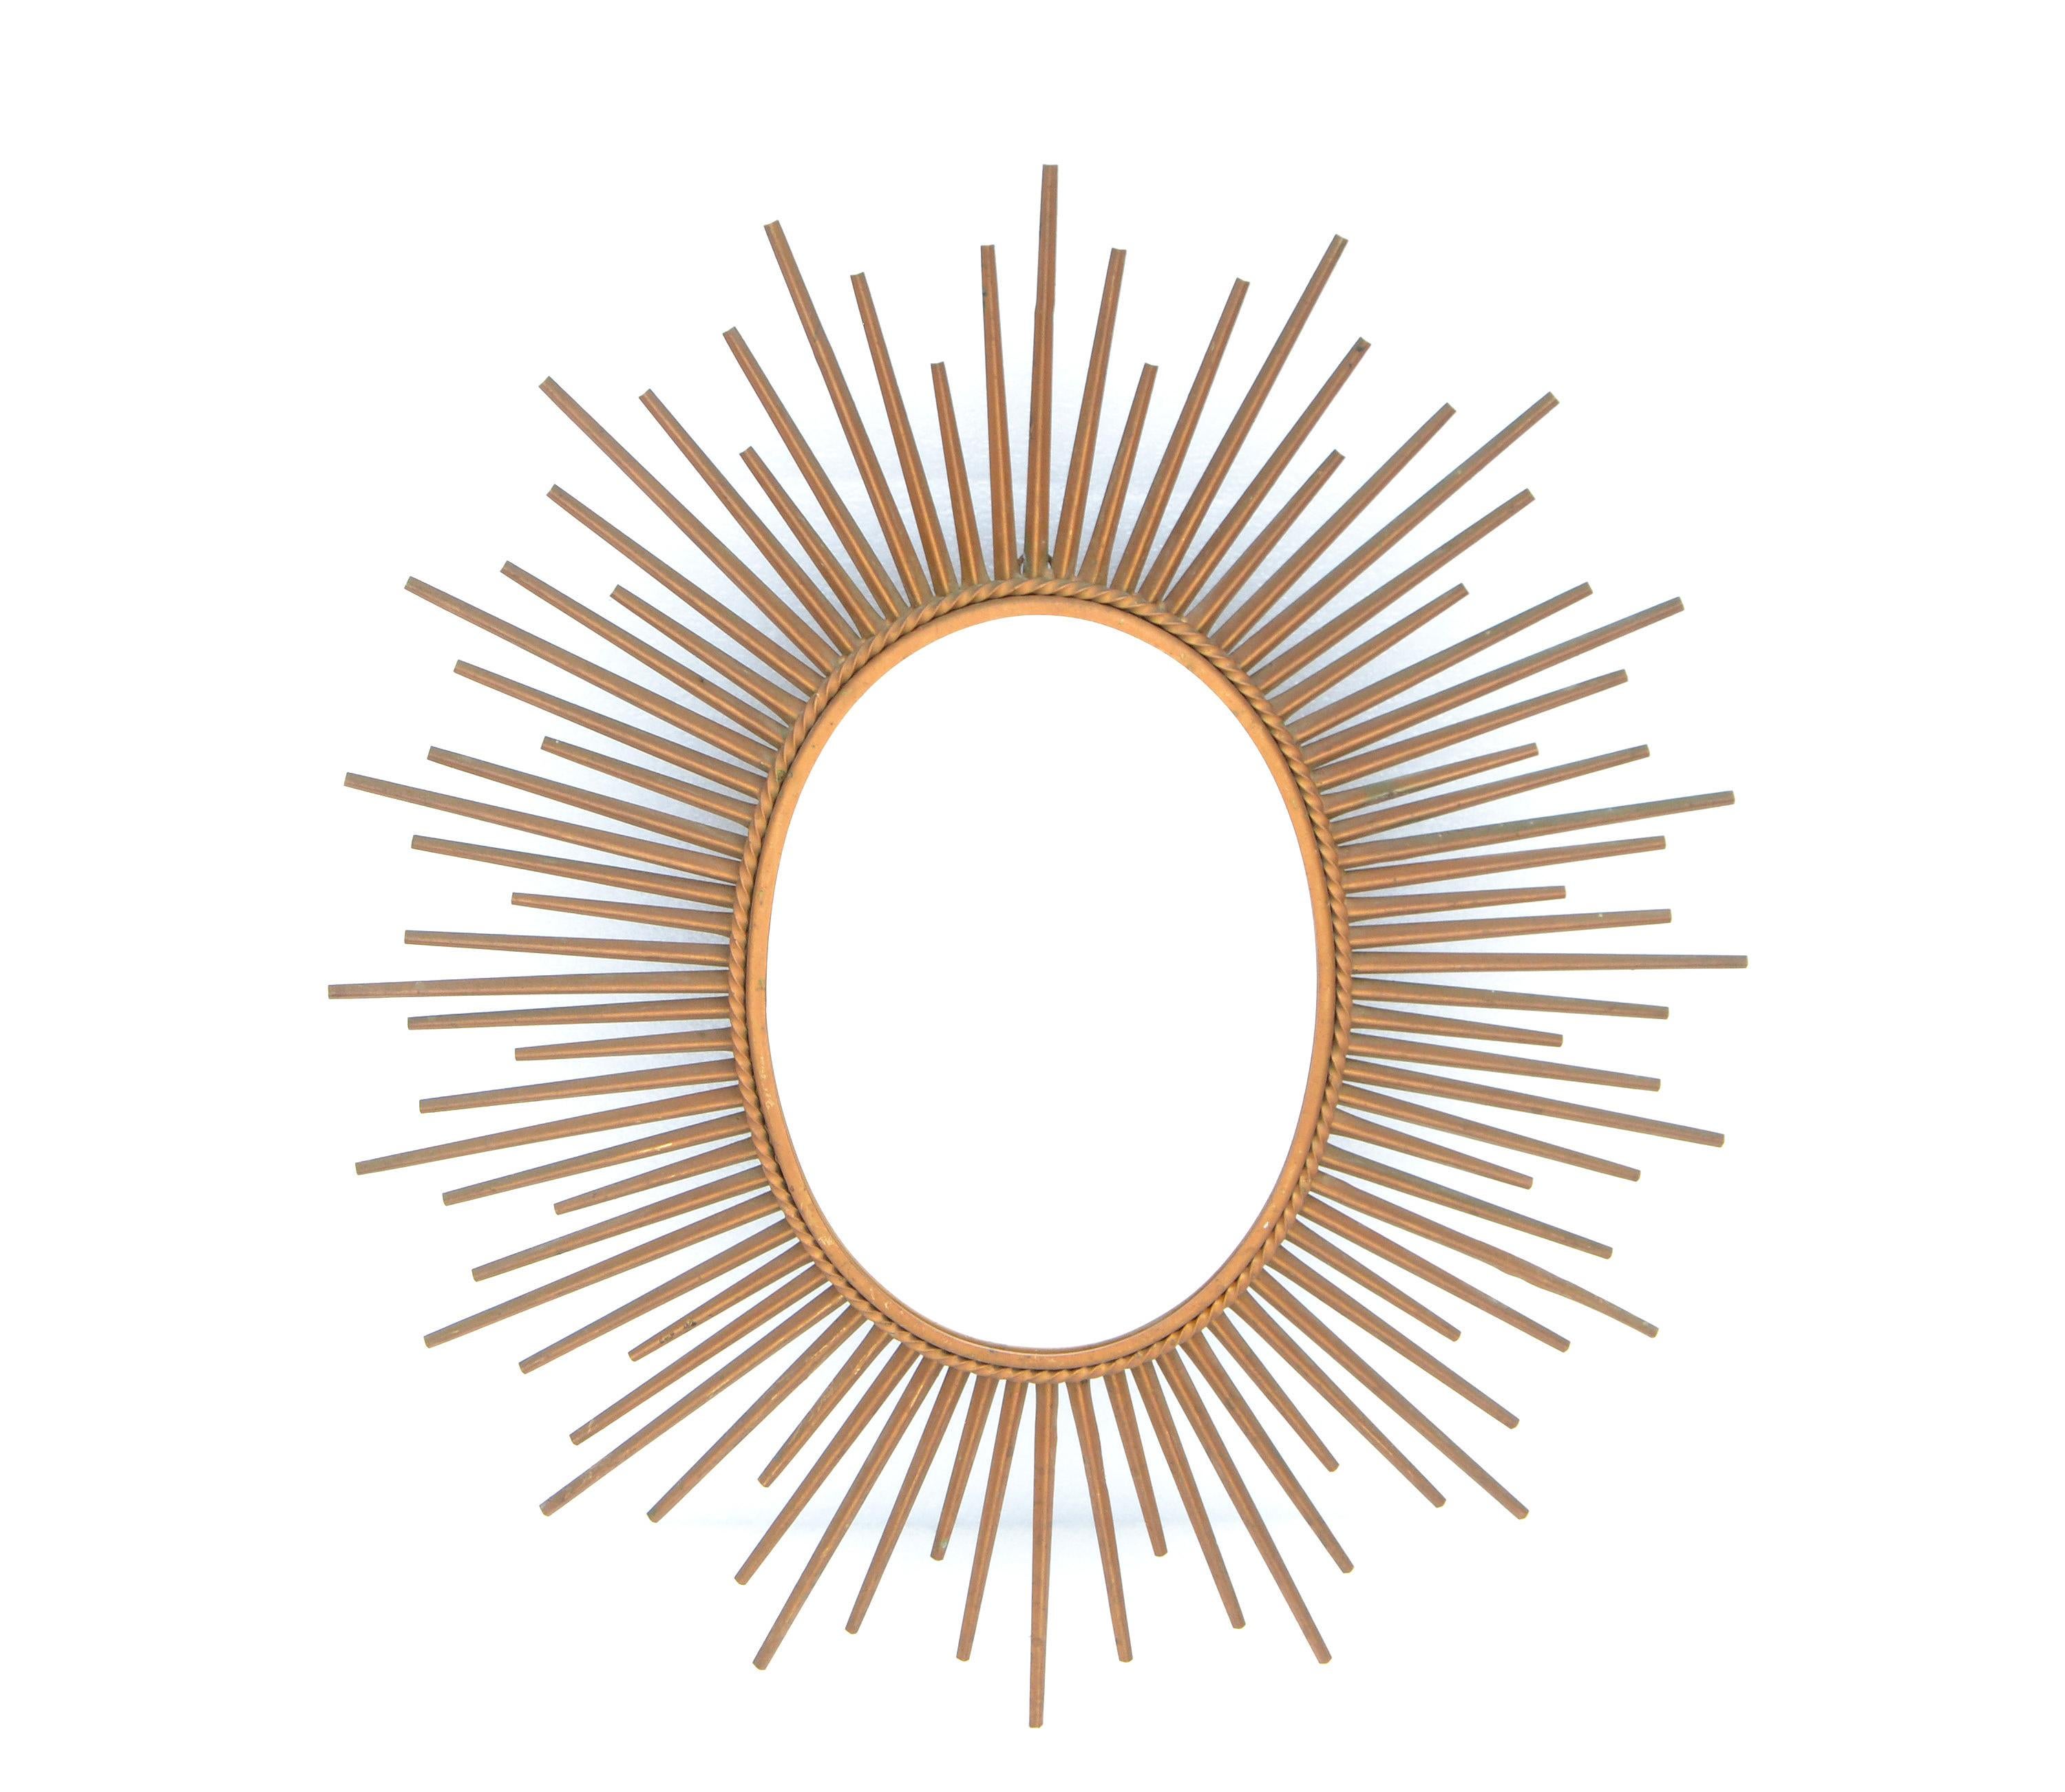 Superb French Mid-Century Modern oval metal sunburst wall mirror in gold finish.
Marked on the reverse Chaty Vallauris, France 1970.
Mirror Size: 10.75 x 7.63 inches. 